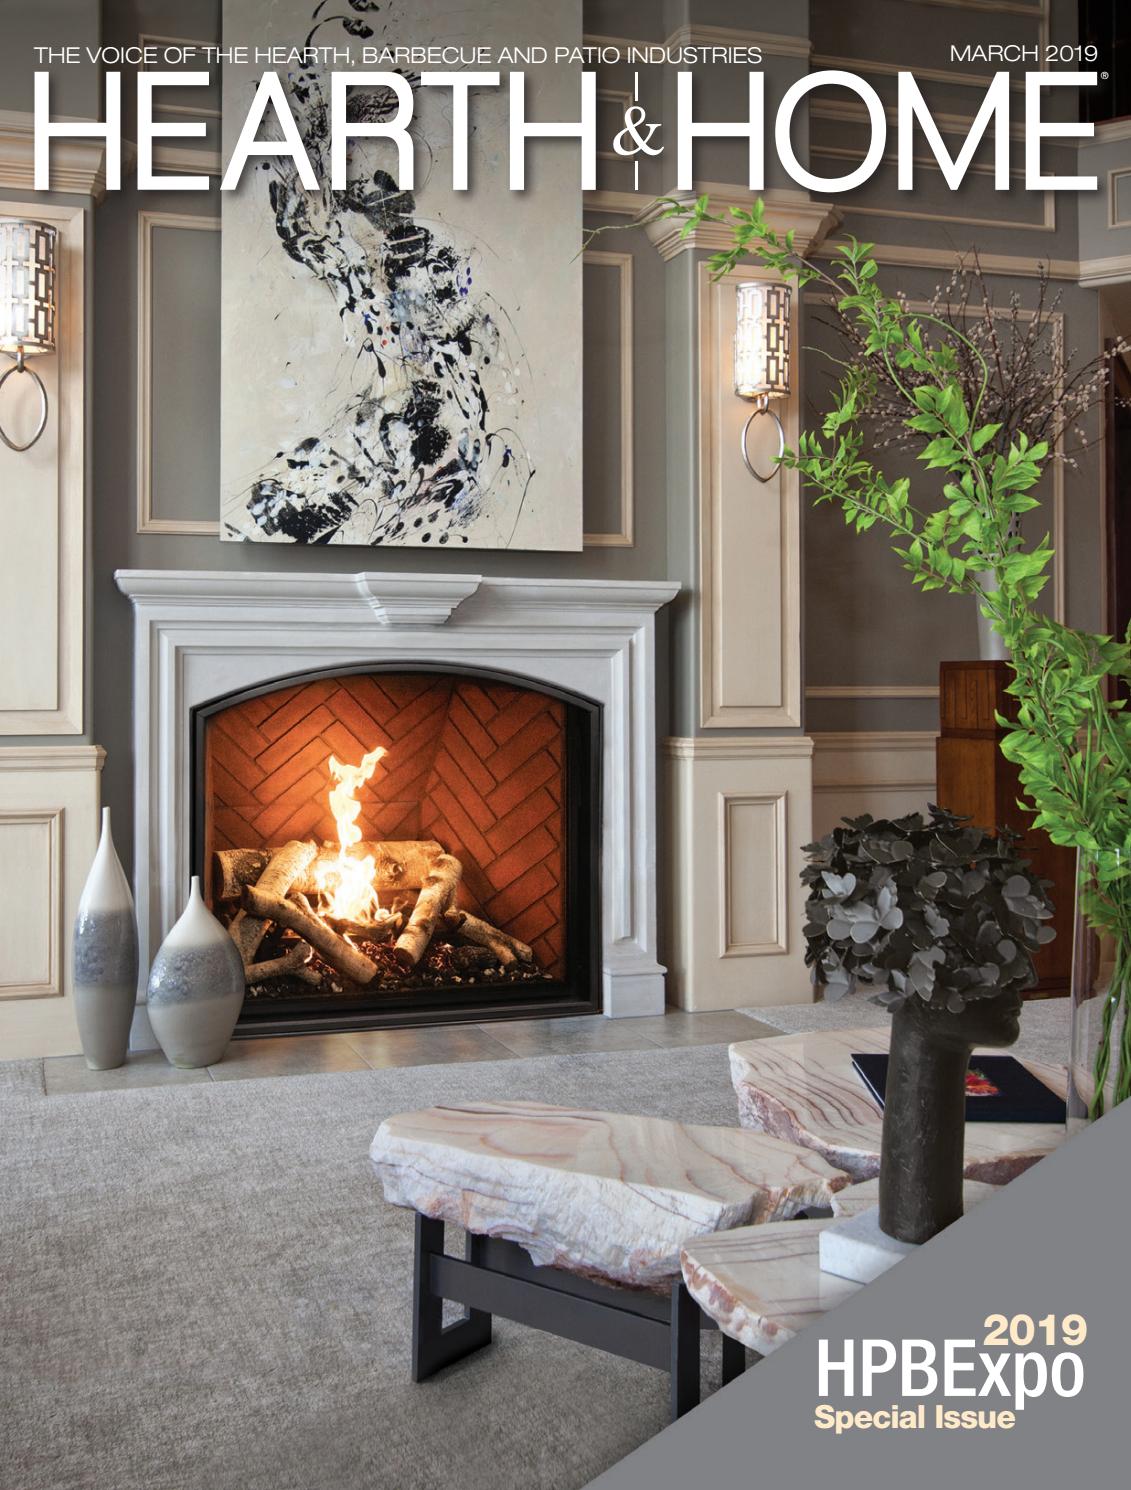 Double Sided Wood Burning Fireplace Beautiful Hearth & Home Magazine – 2019 March issue by Hearth & Home